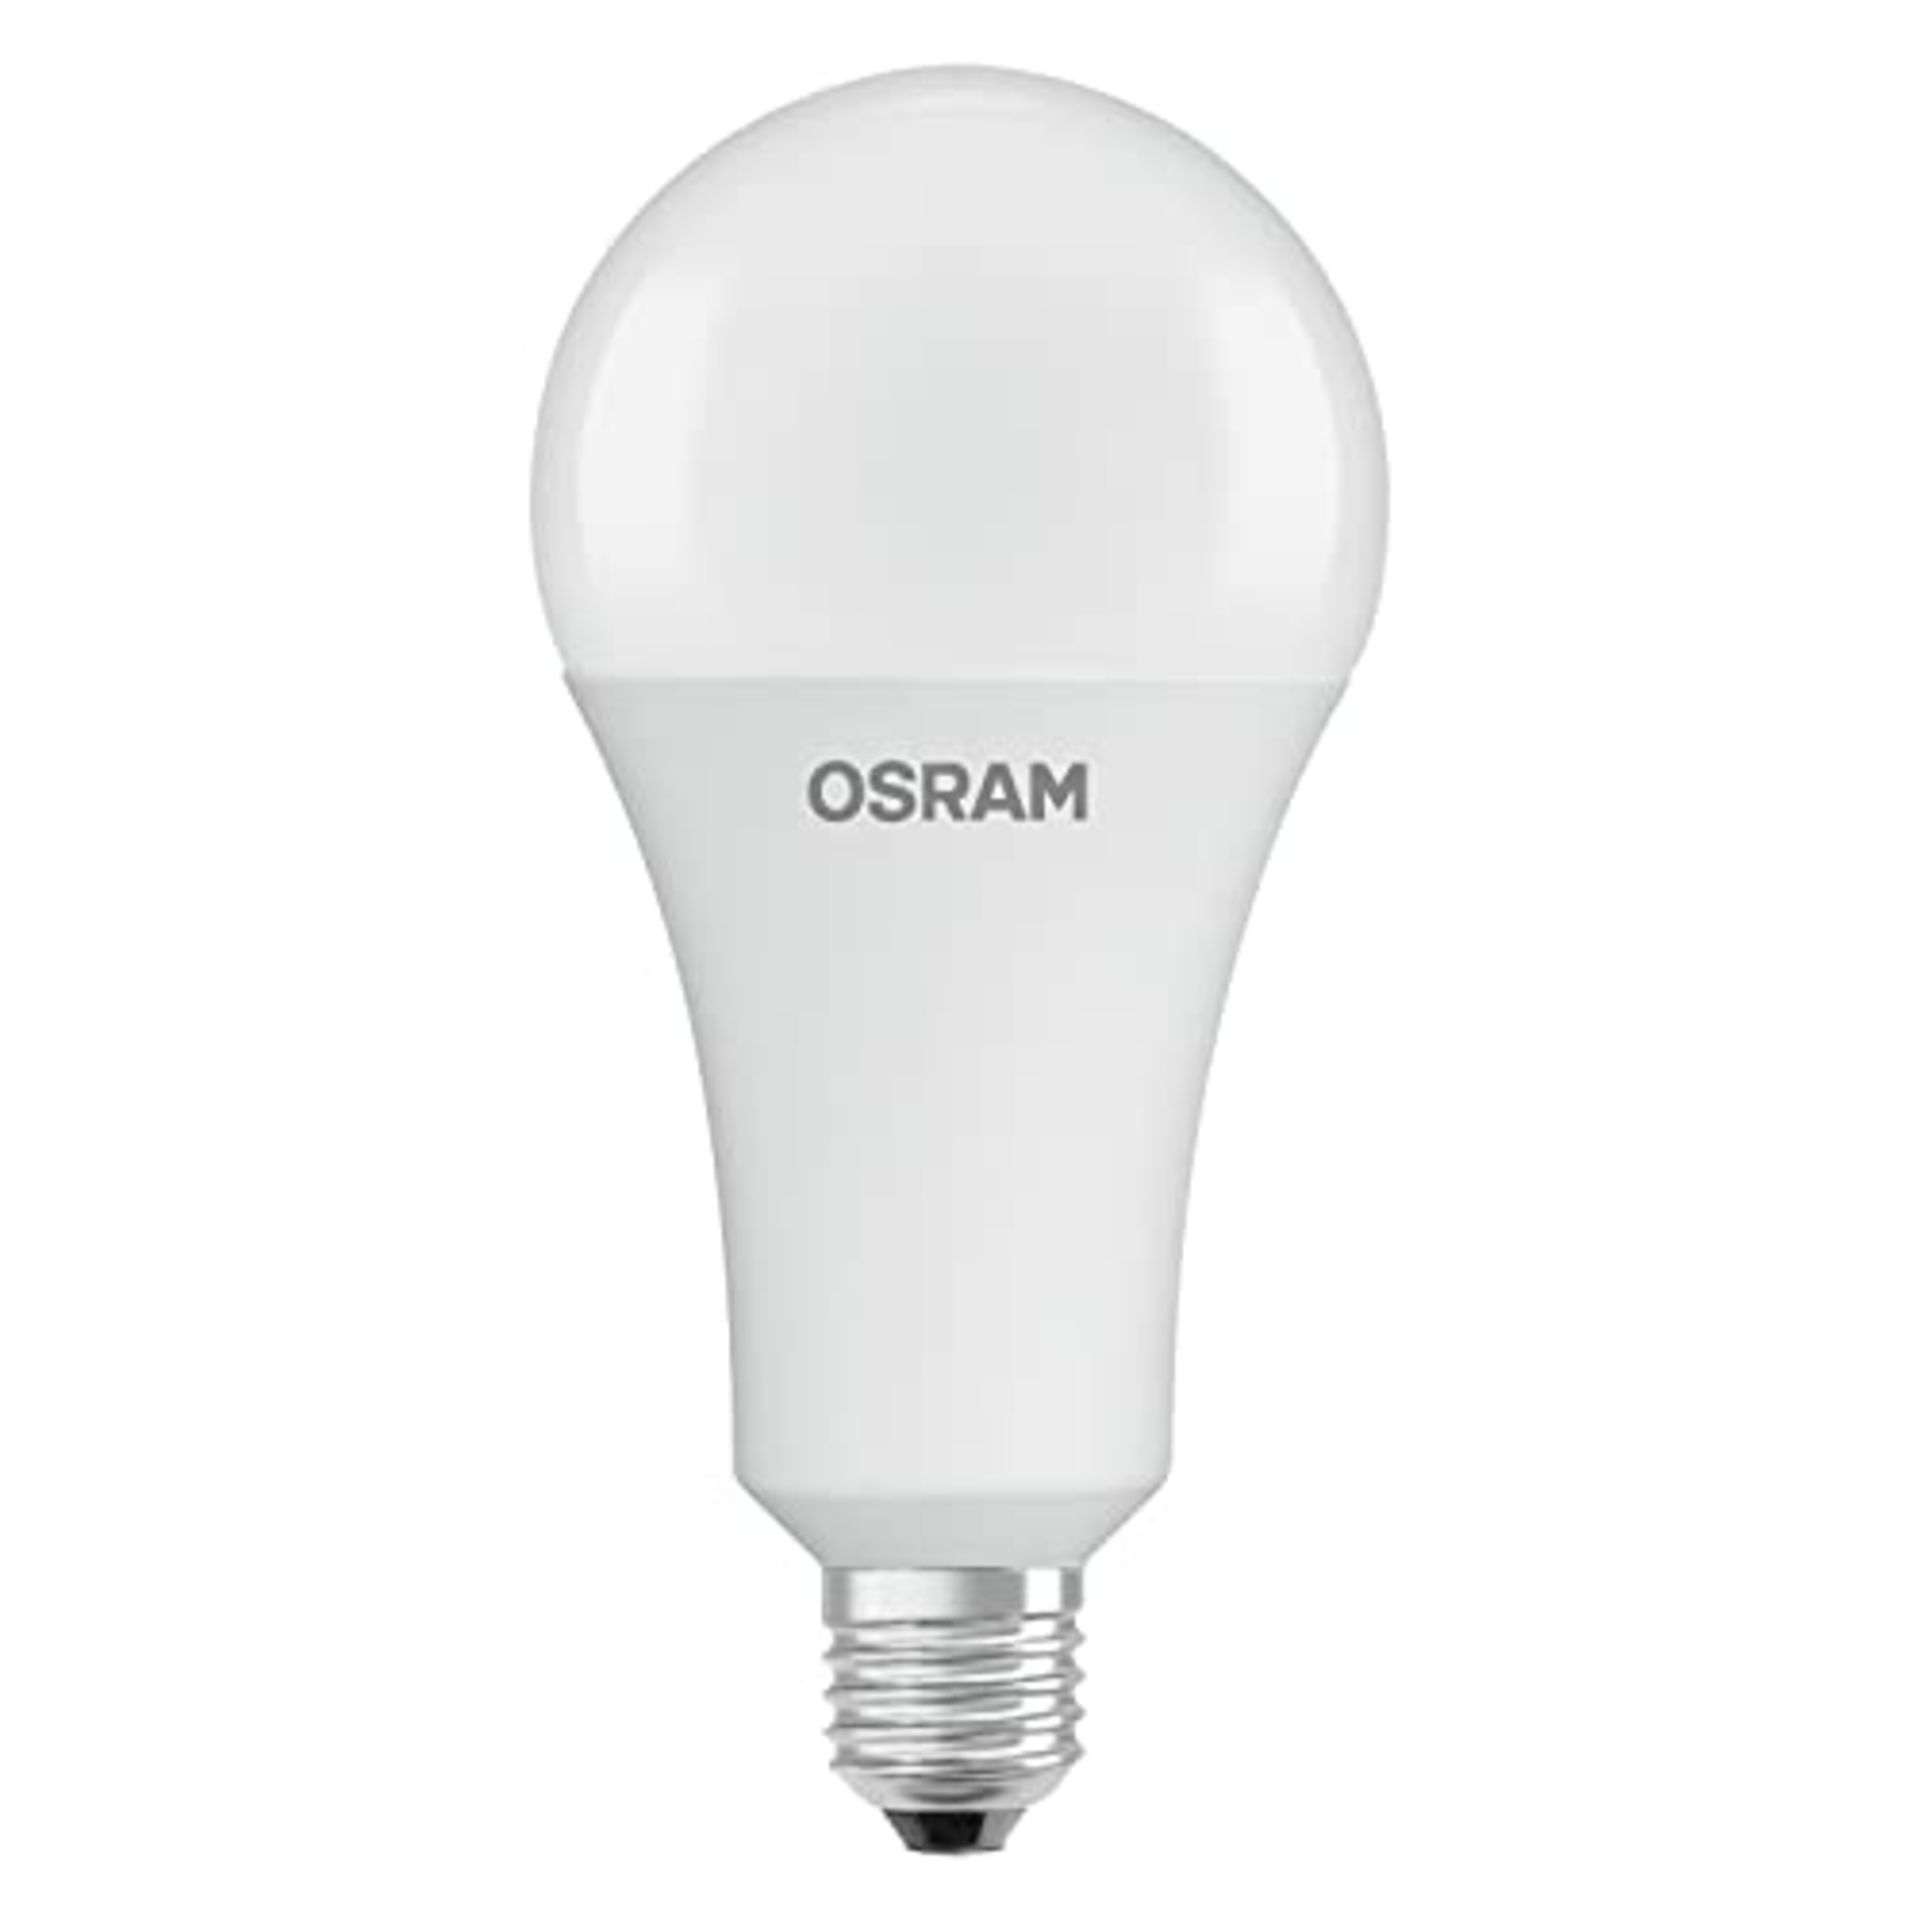 OSRAM LED Star Classic A200, frosted LED lamp in bulb shape, E27 base, warm white (270